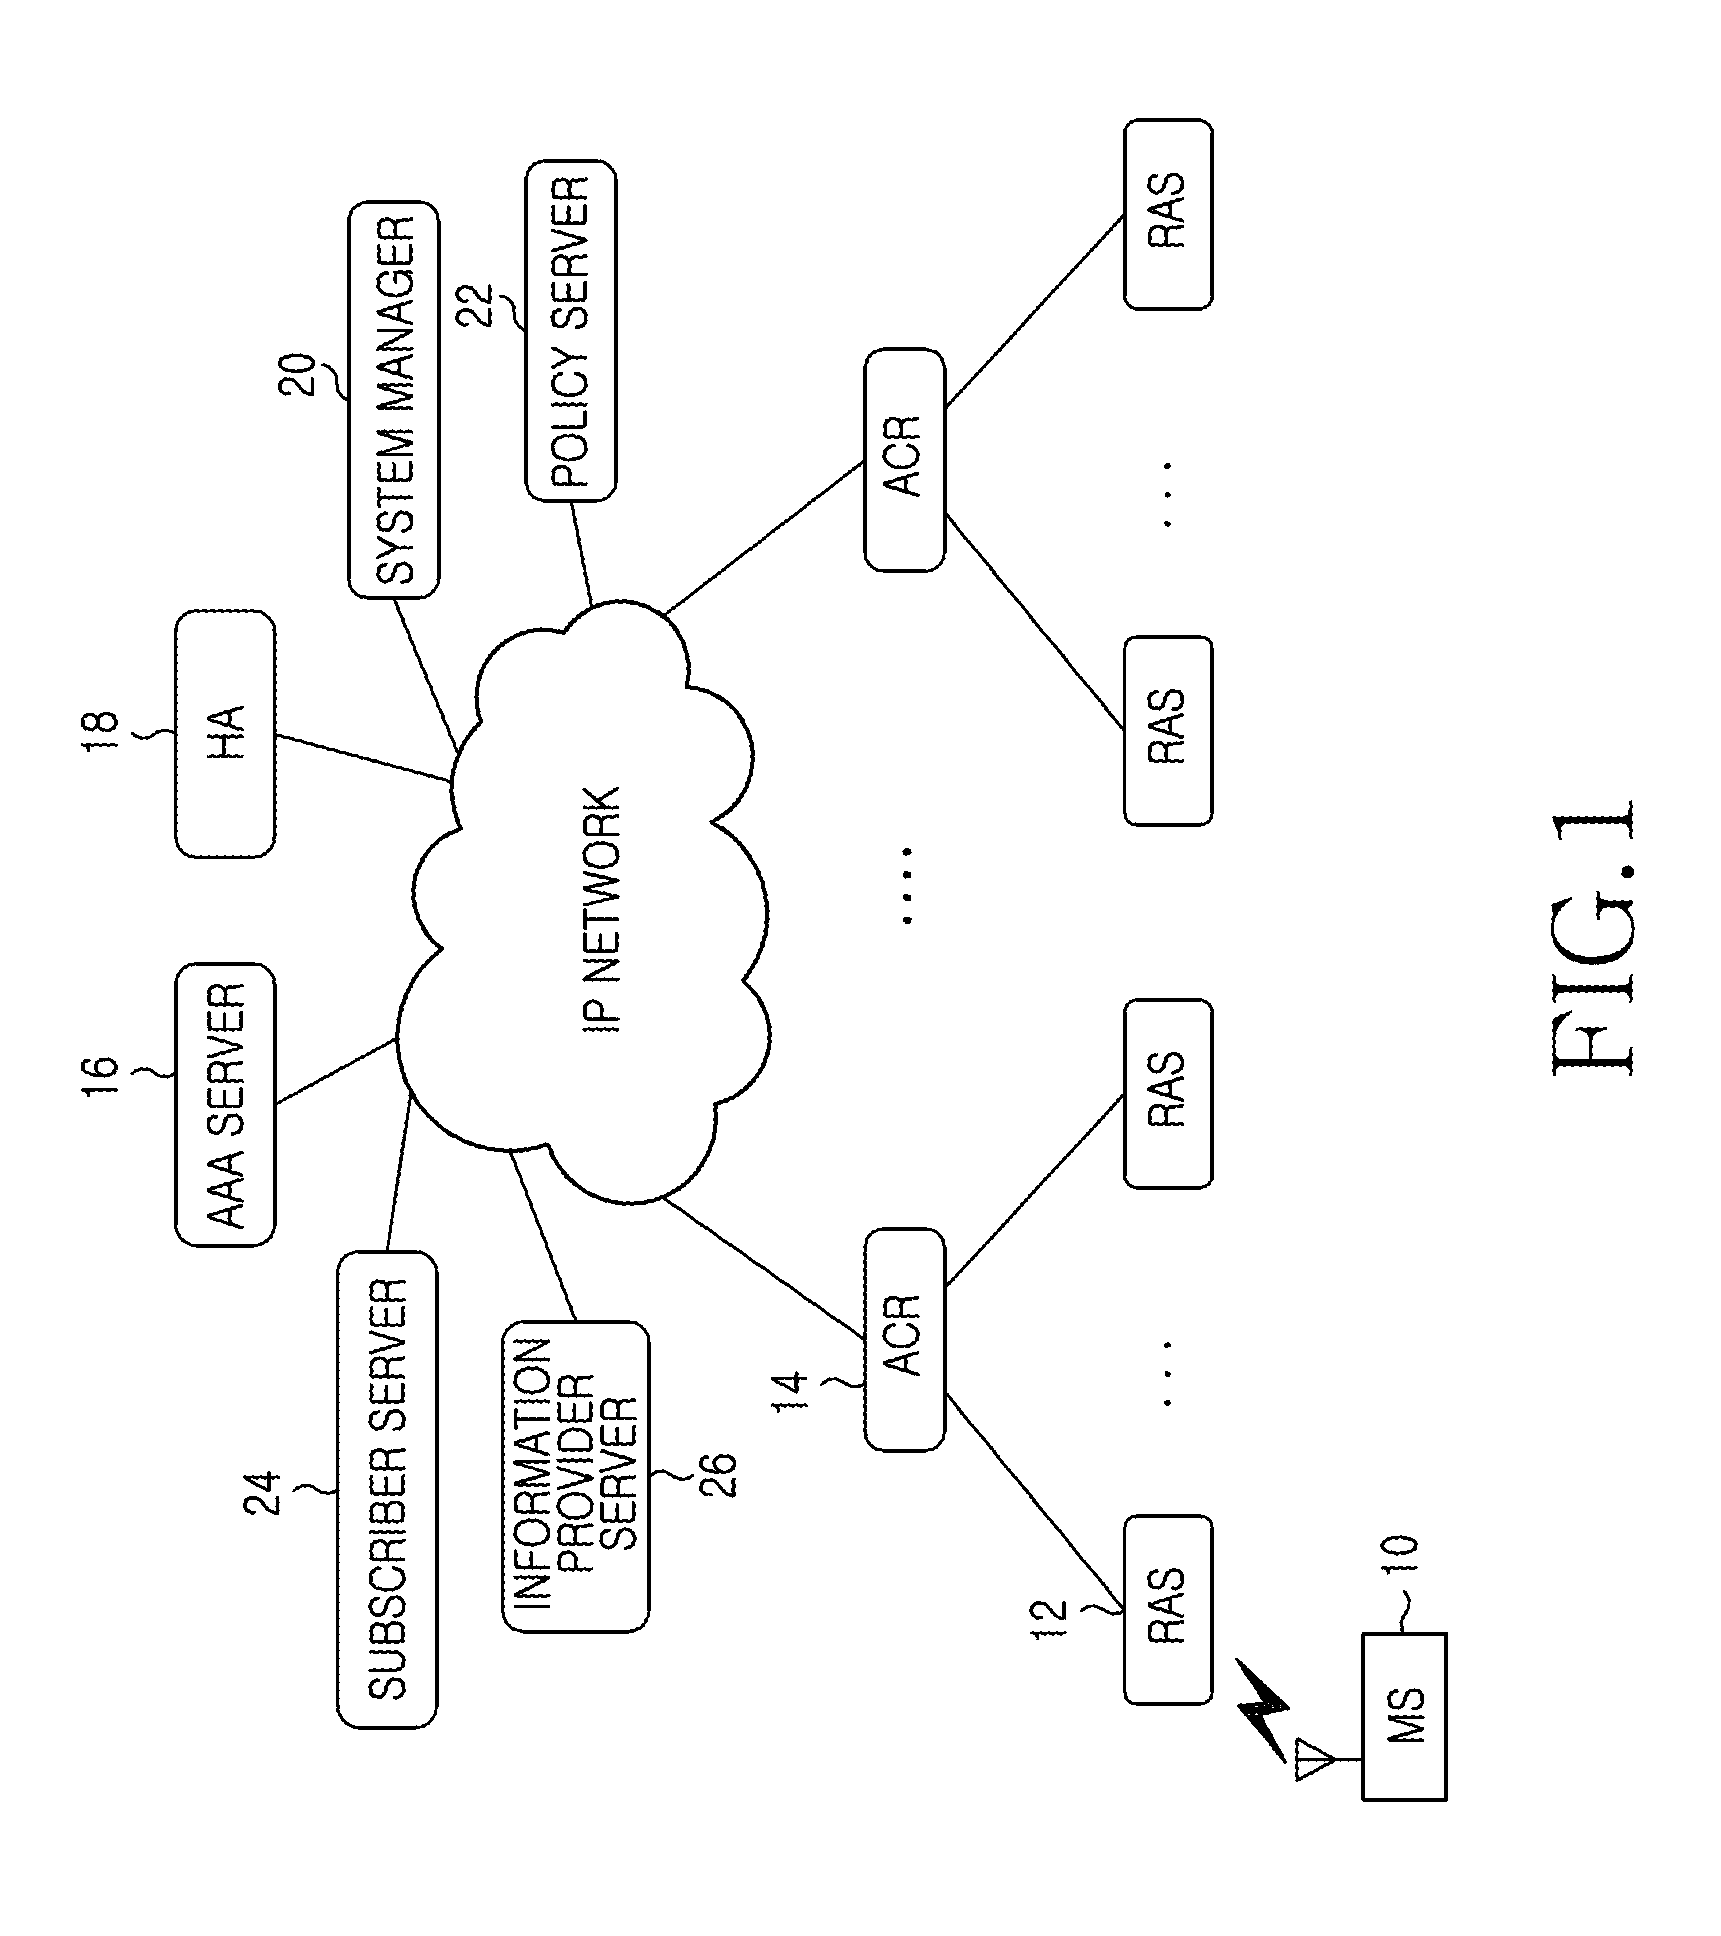 Information service apparatus and method in wireless communication system